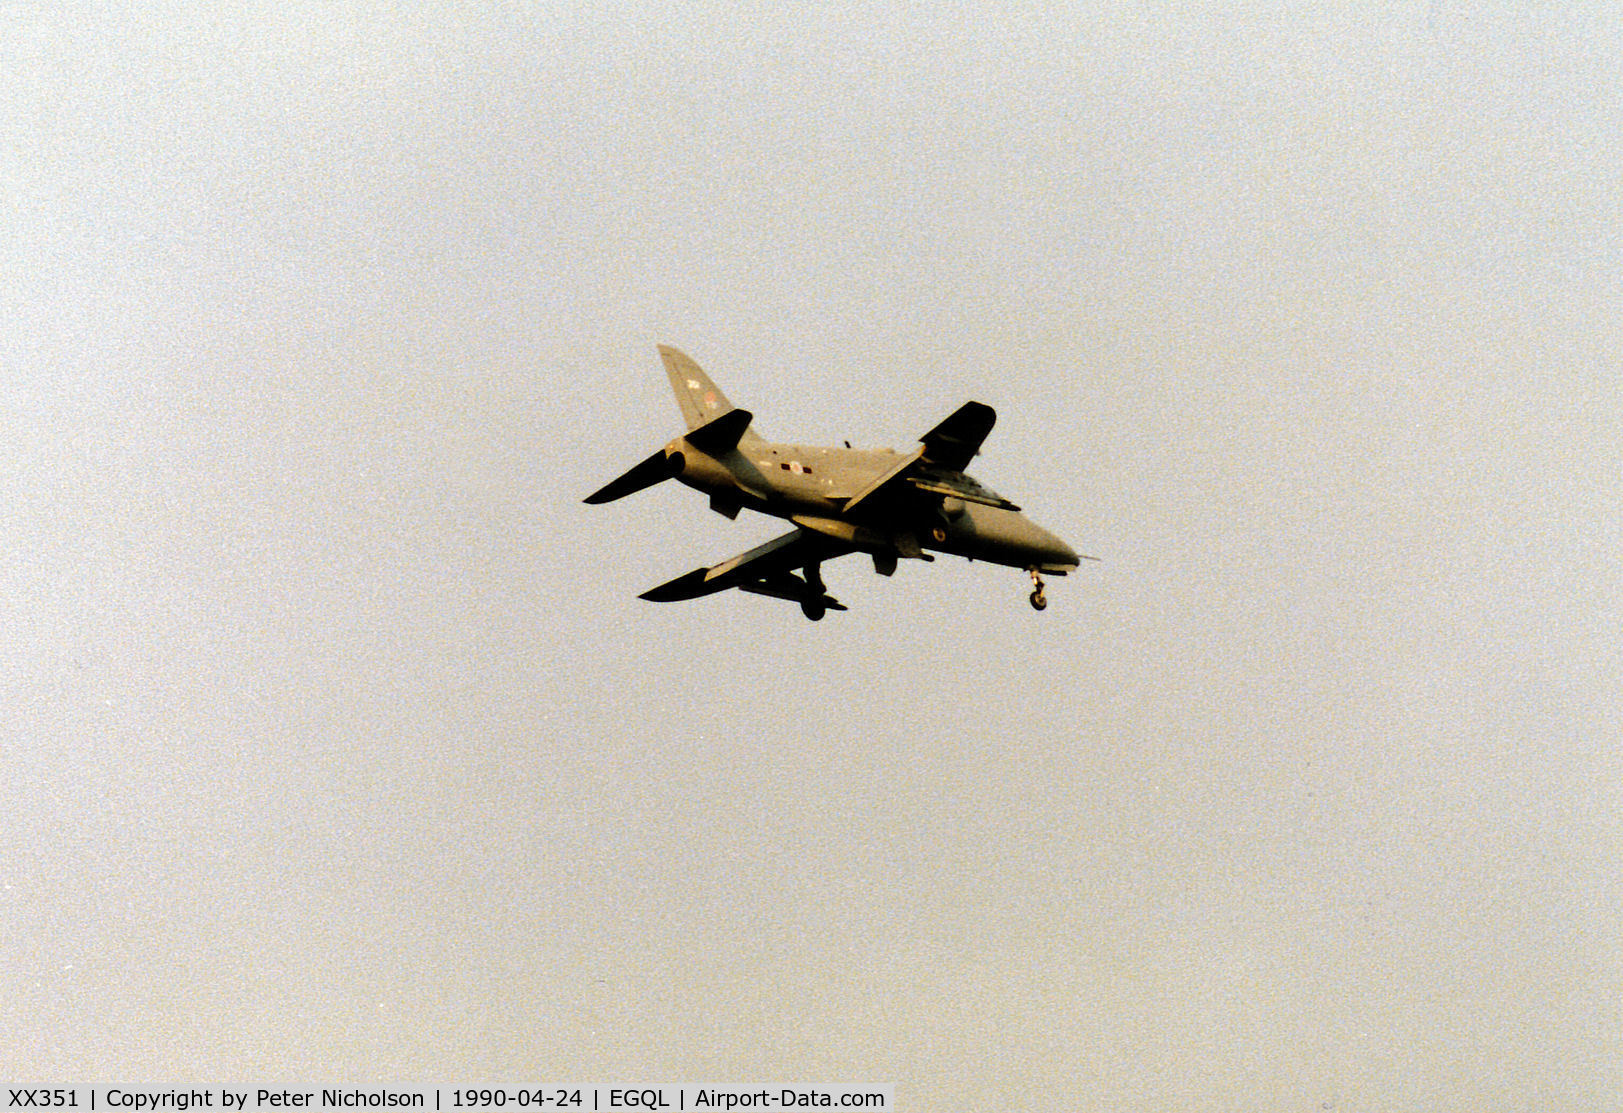 XX351, 1981 Hawker Siddeley Hawk T.1A C/N 201/312175, Hawk T.1A of 234 Squadron returning to RAF Leuchars after an Exercise Elder Forest mission in April 1990.